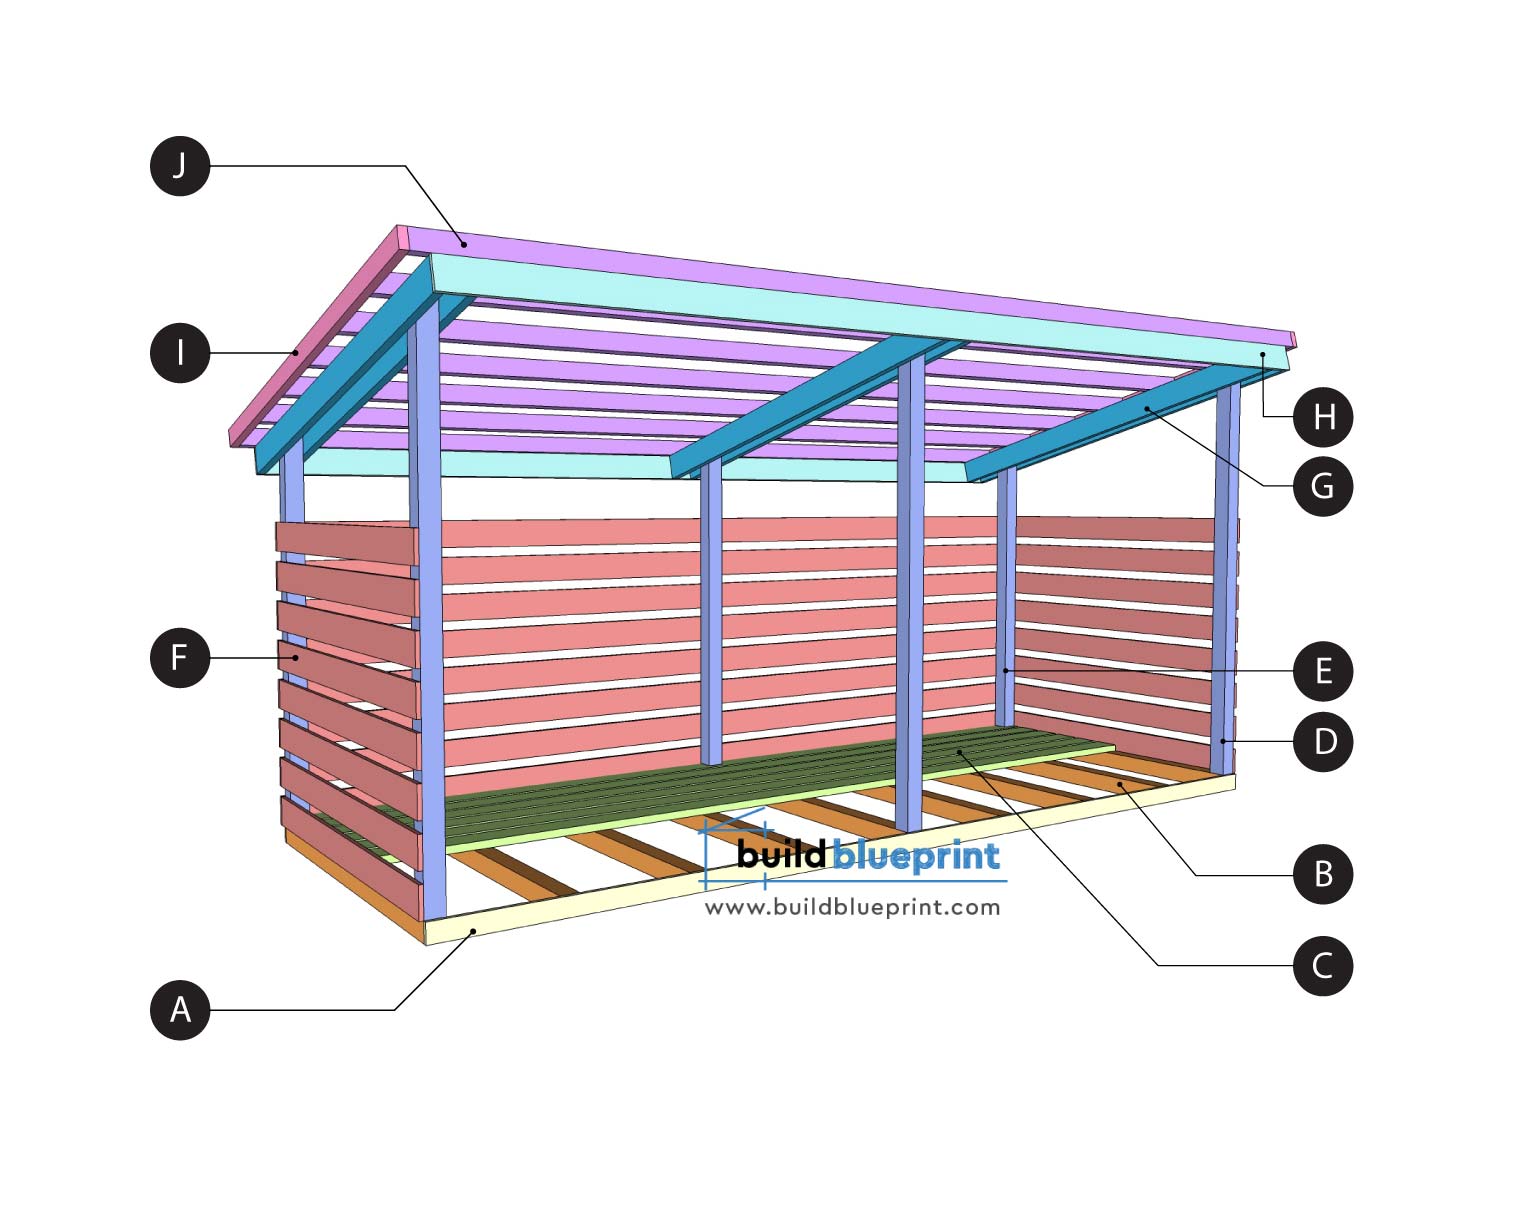 Firewood SHED PLANS Tool Shed Garden Shed Diy How To Plans Garden Furniture Wood Joinery Plans /Instant PDF Download